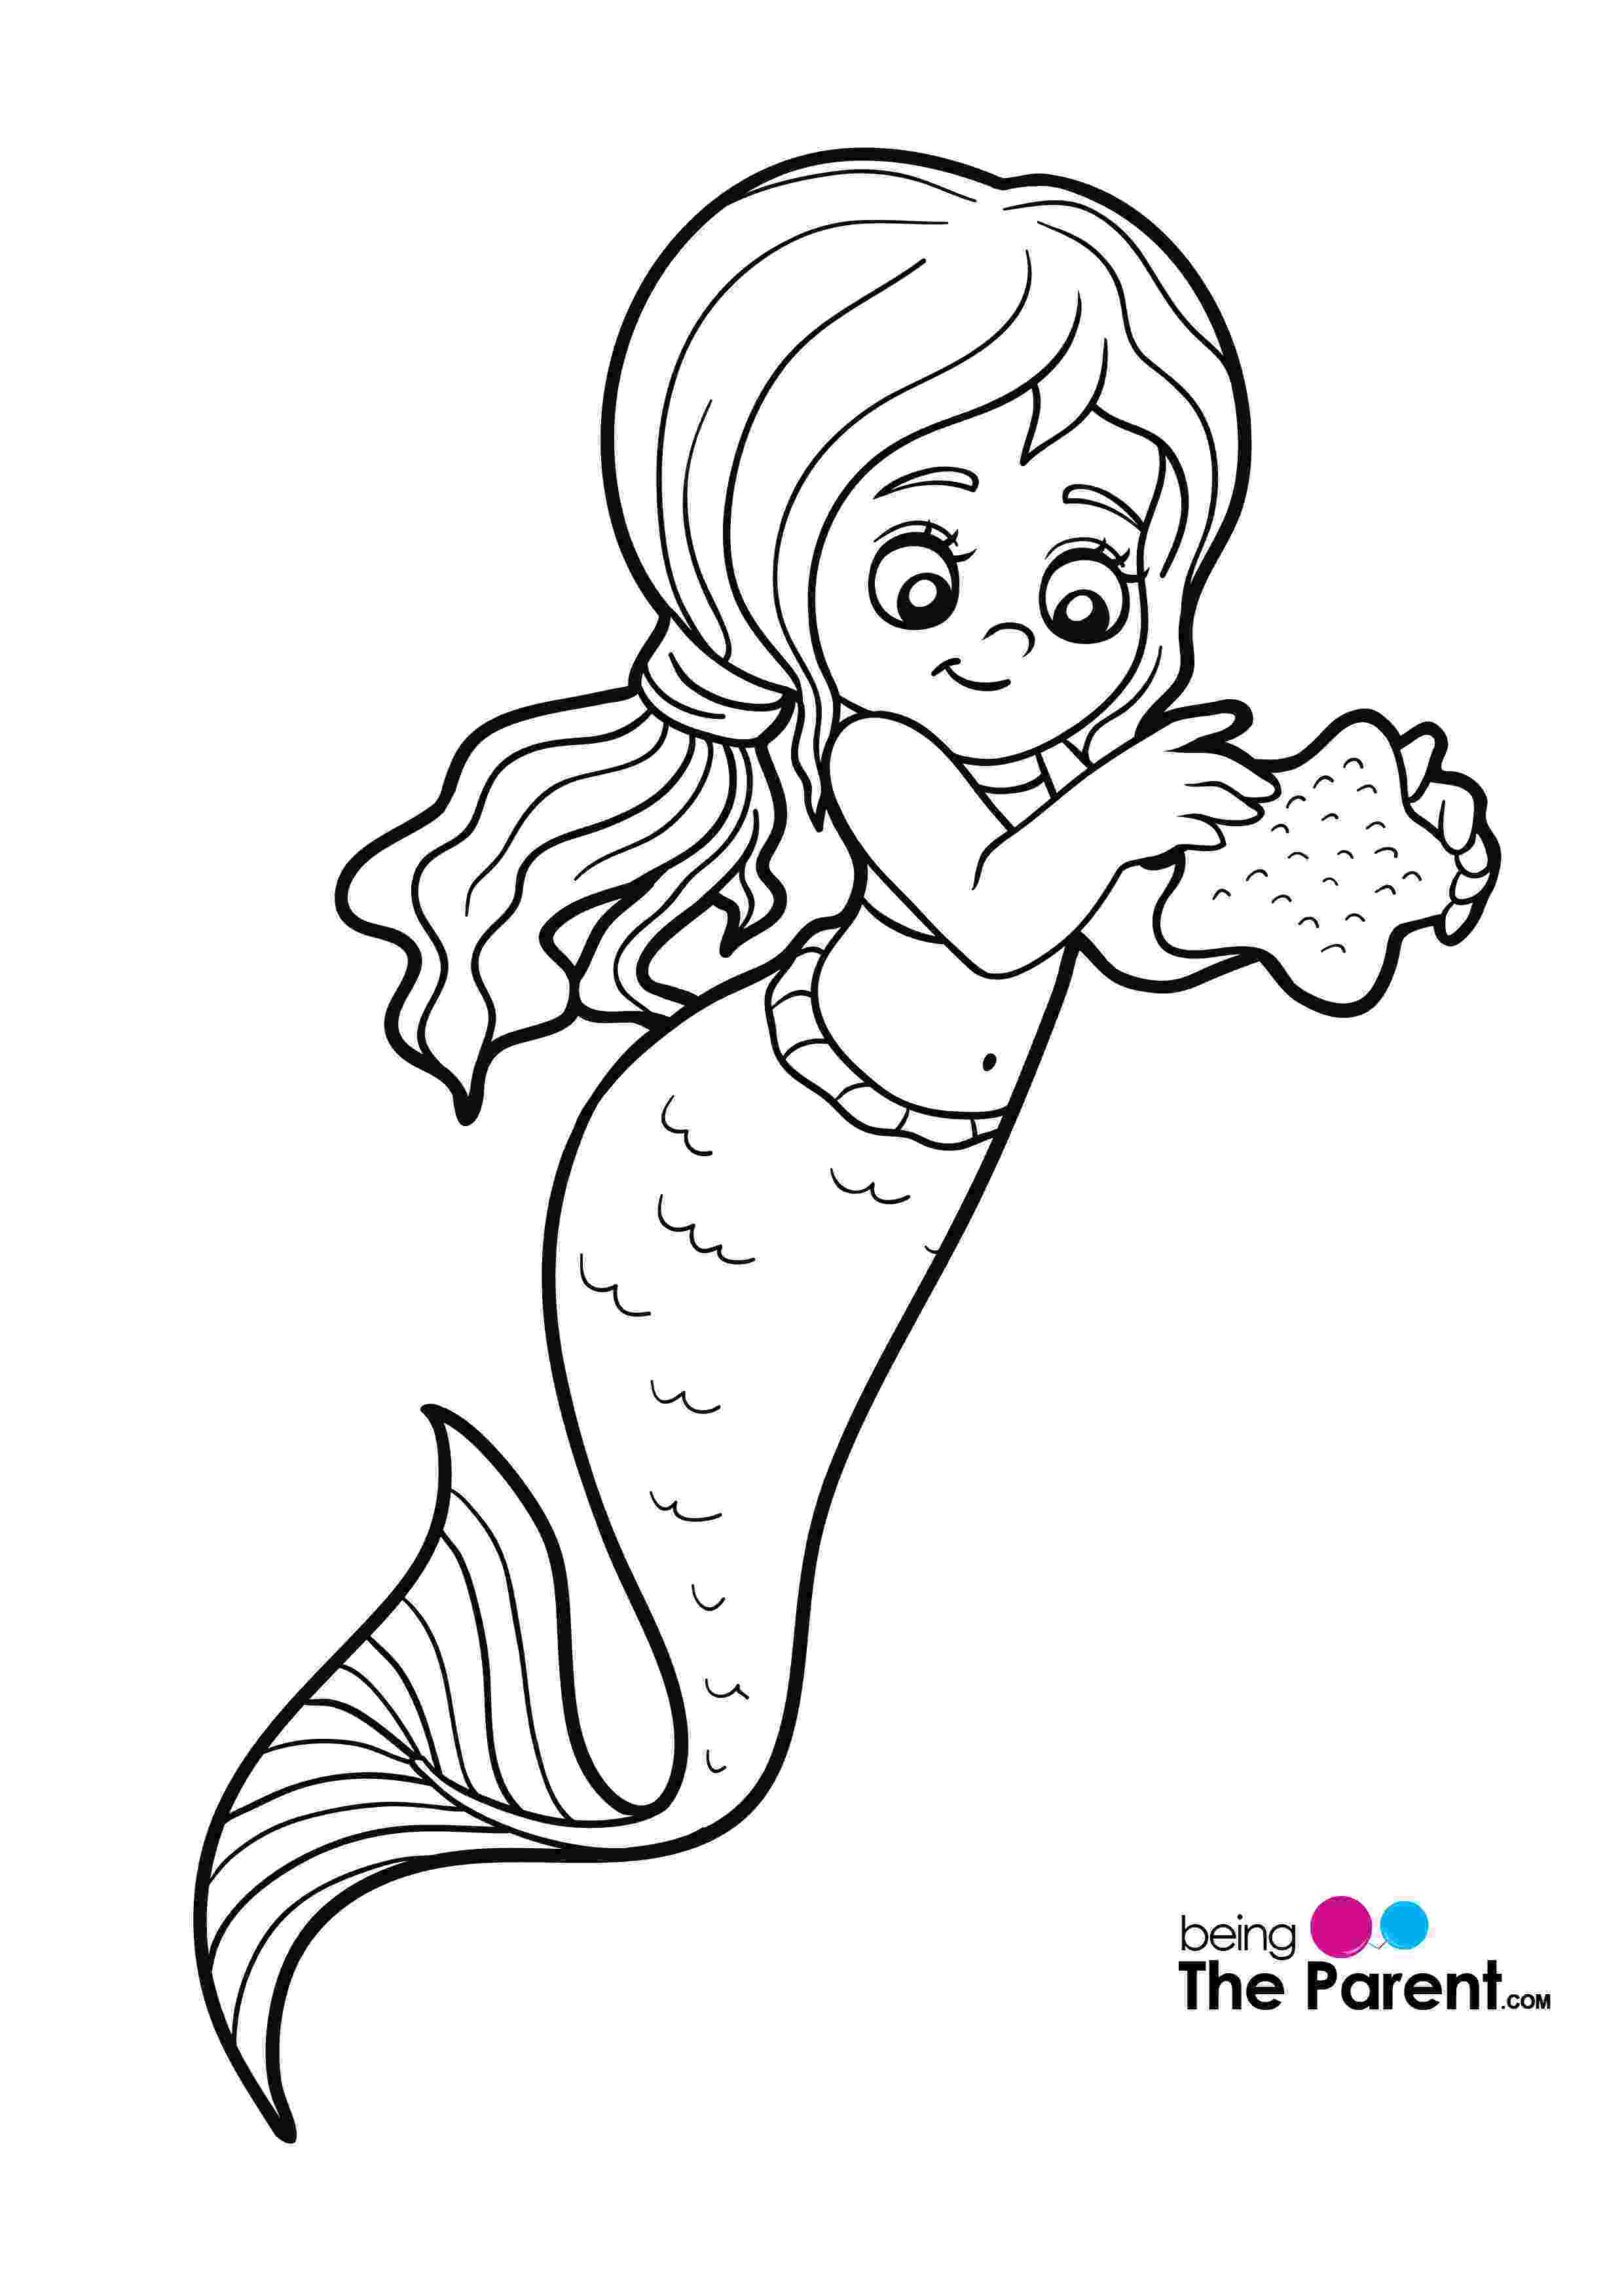 mermaid coloring page 10 easy mermaid coloring pages for your little ones coloring mermaid page 